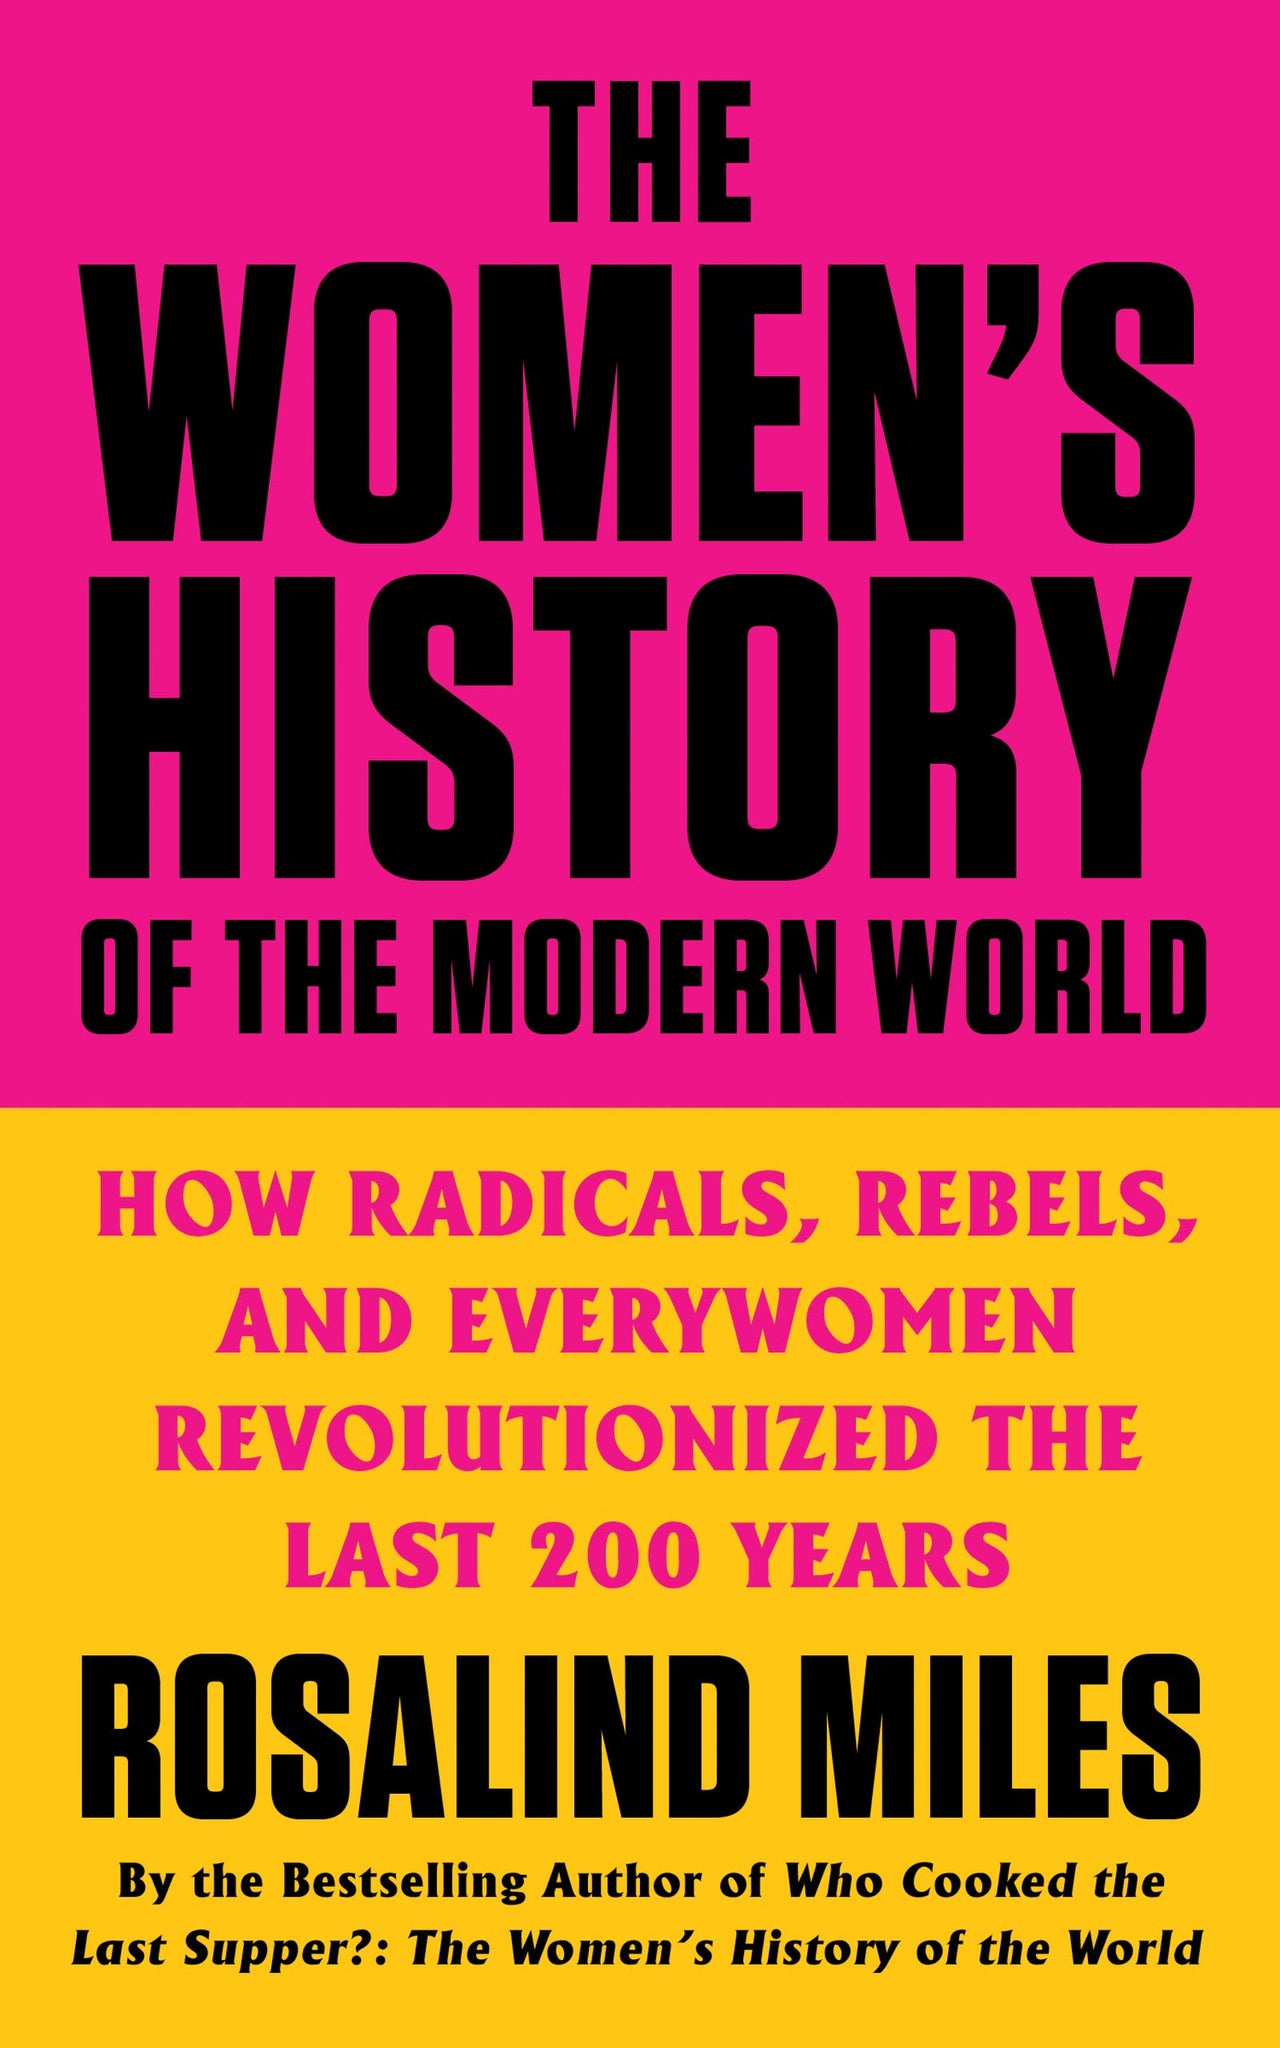 The Women's History of the Modern World: How Radicals, Rebels, and Everywomen Revolutionized the Last 200 Years (Paperback)